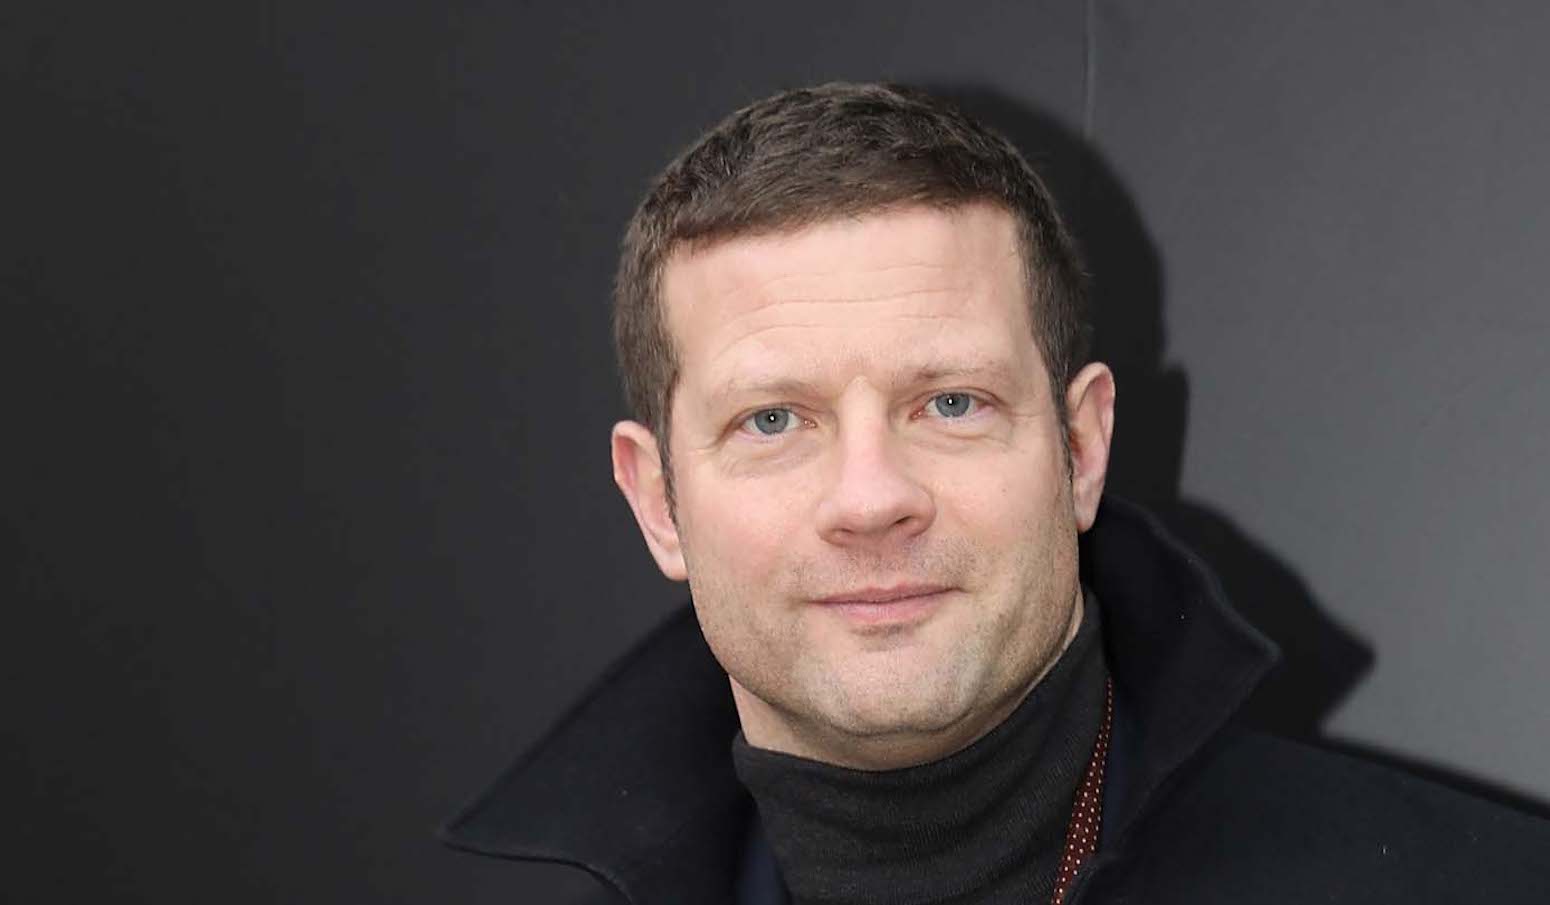 'Empathy is the word' - Dermot O’Leary hits back at Piers Morgan's ...